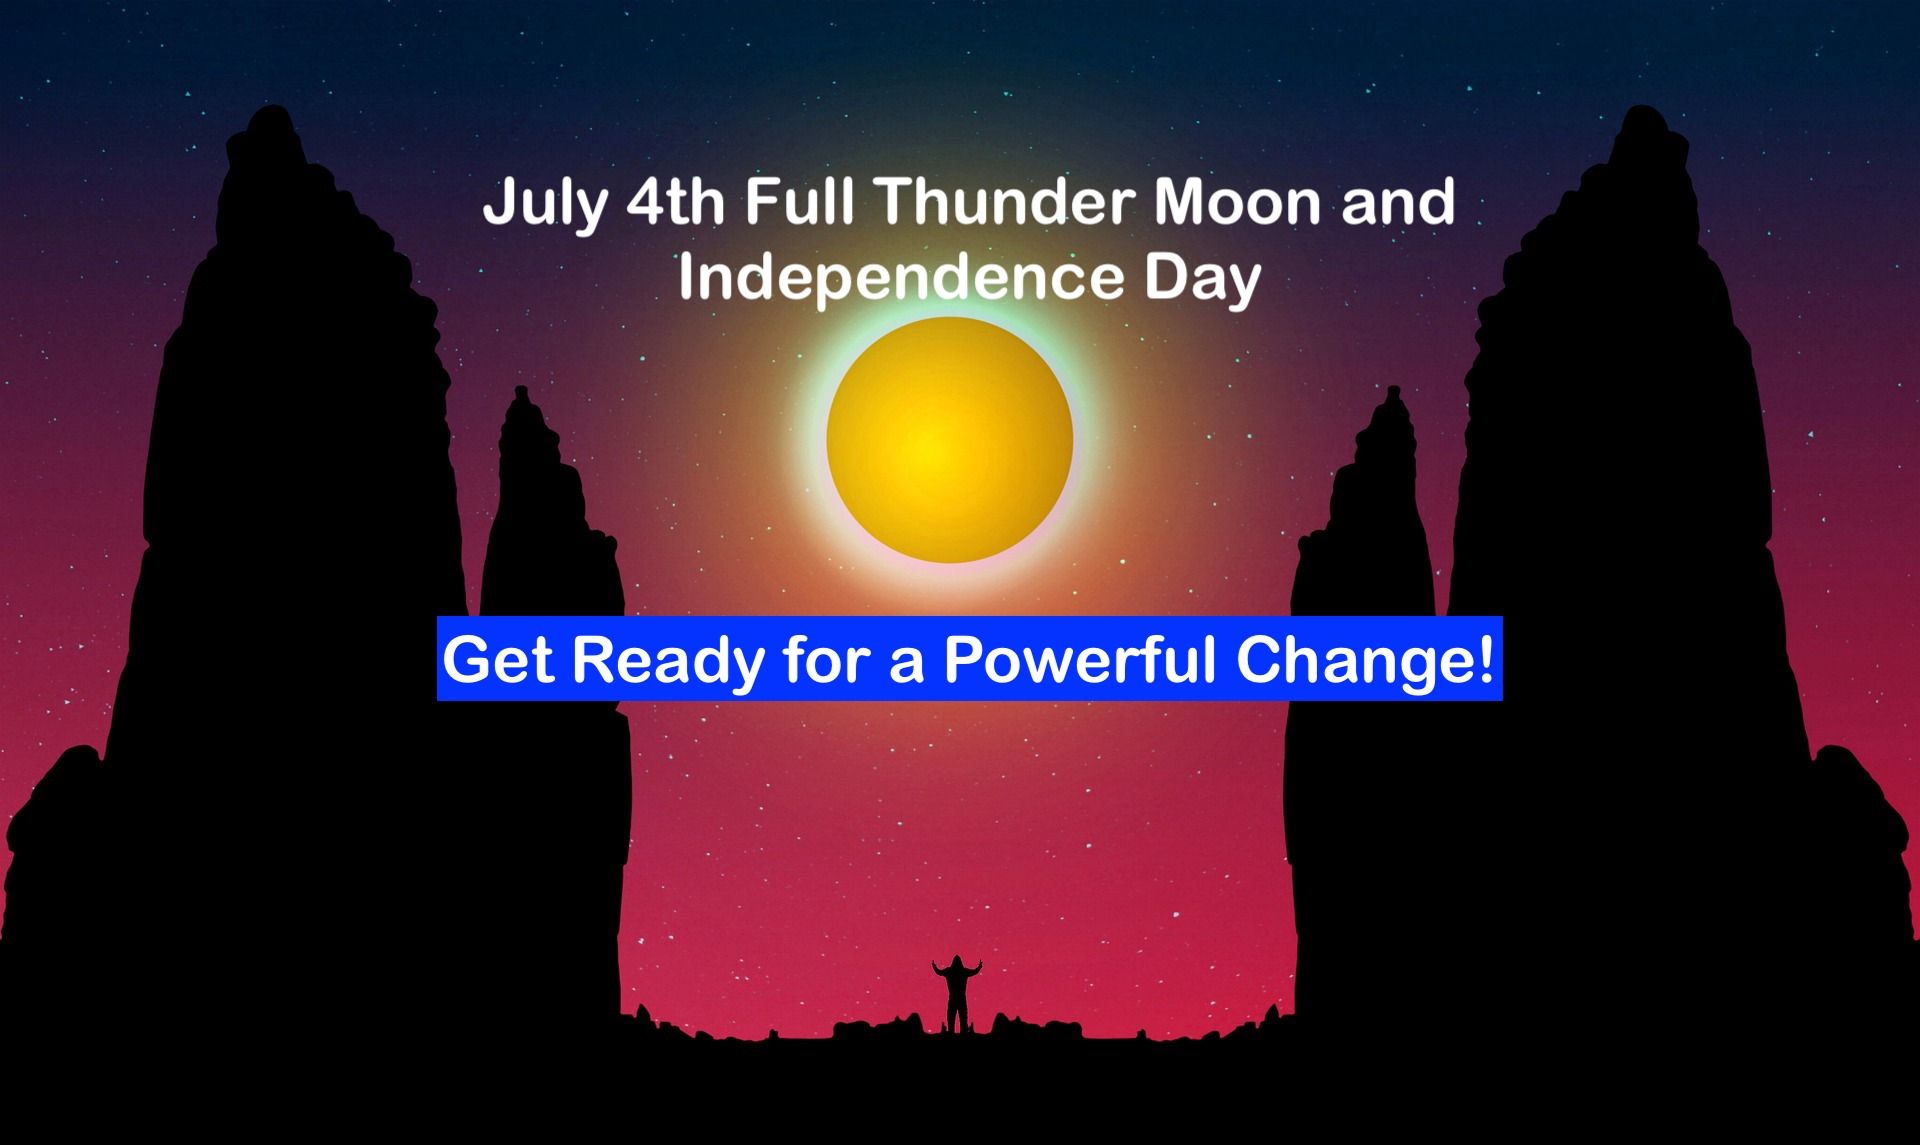 July 2020: It's Full Thunder Moon! Get Ready for a Powerful Change